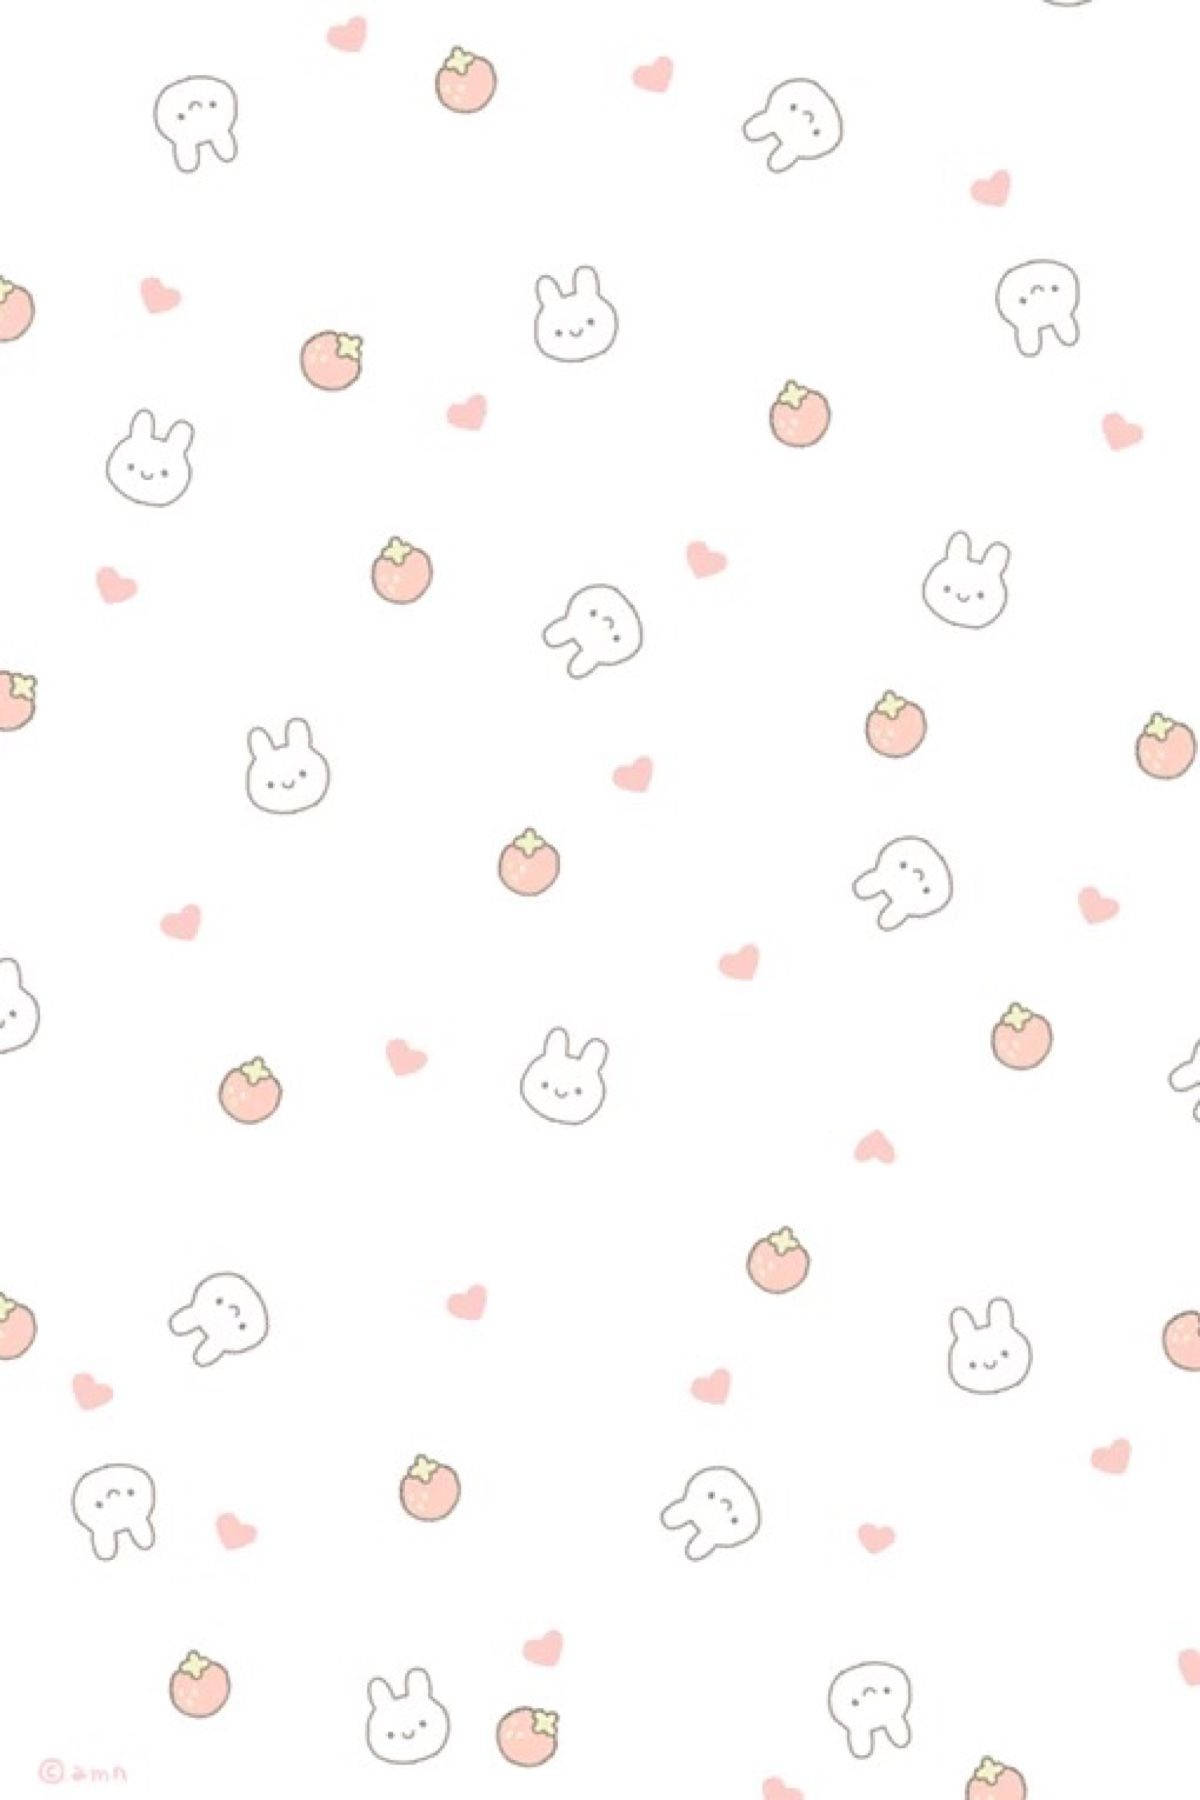 Cute Rabbits And Strawberries Pattern Background